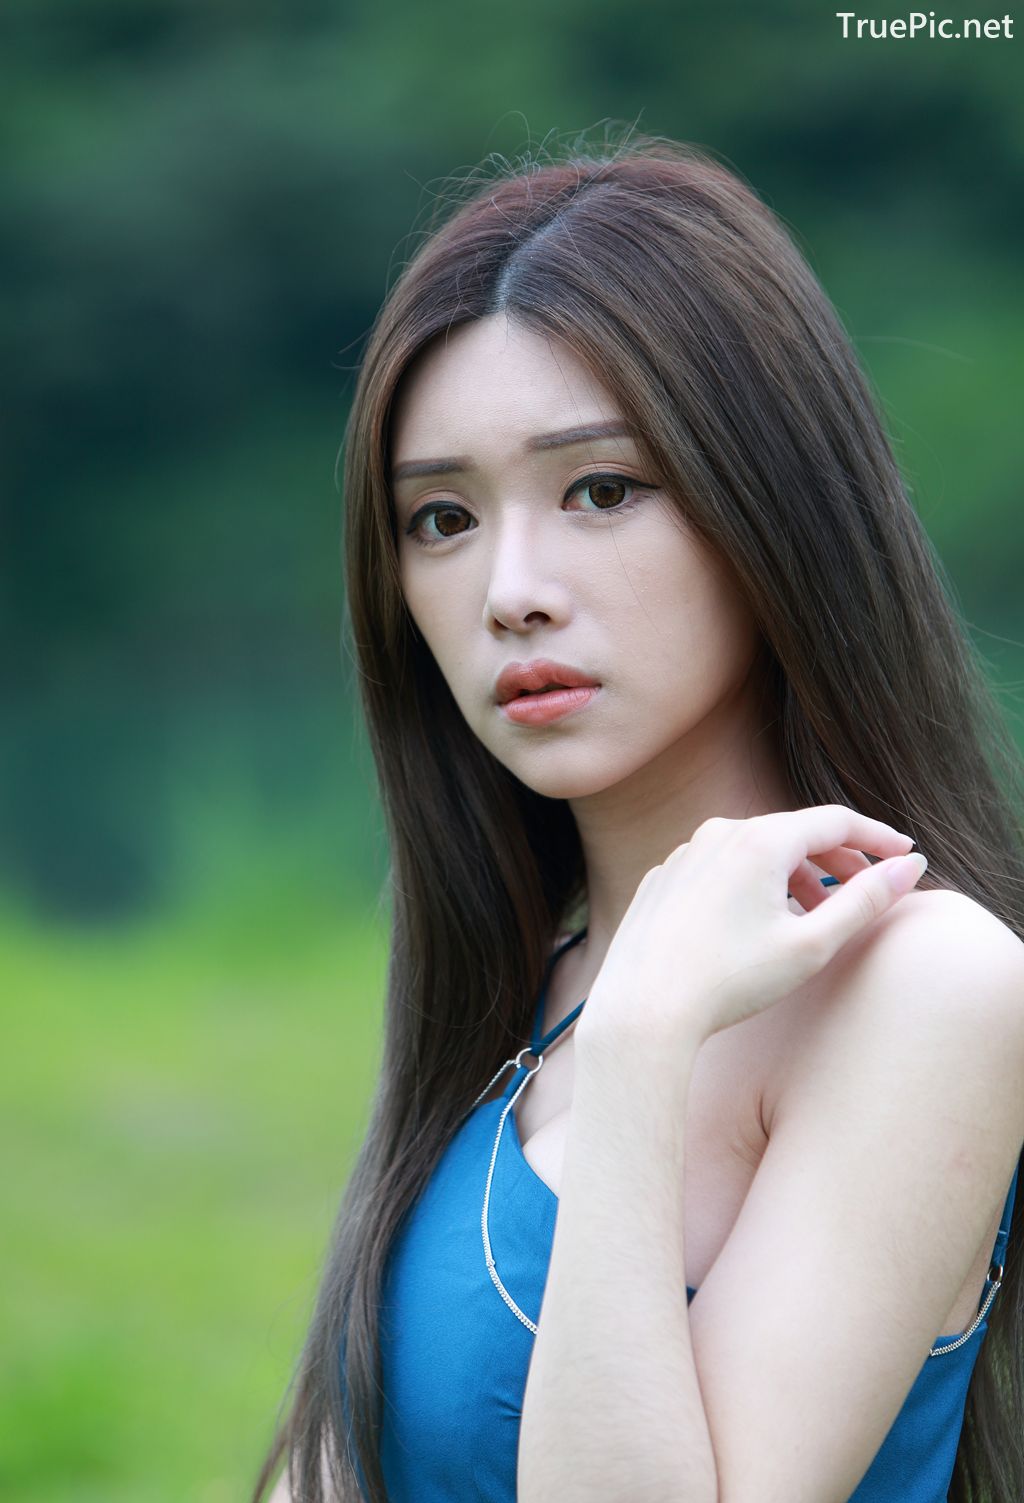 Image-Taiwanese-Pure-Girl-承容-Young-Beautiful-And-Lovely-TruePic.net- Picture-39